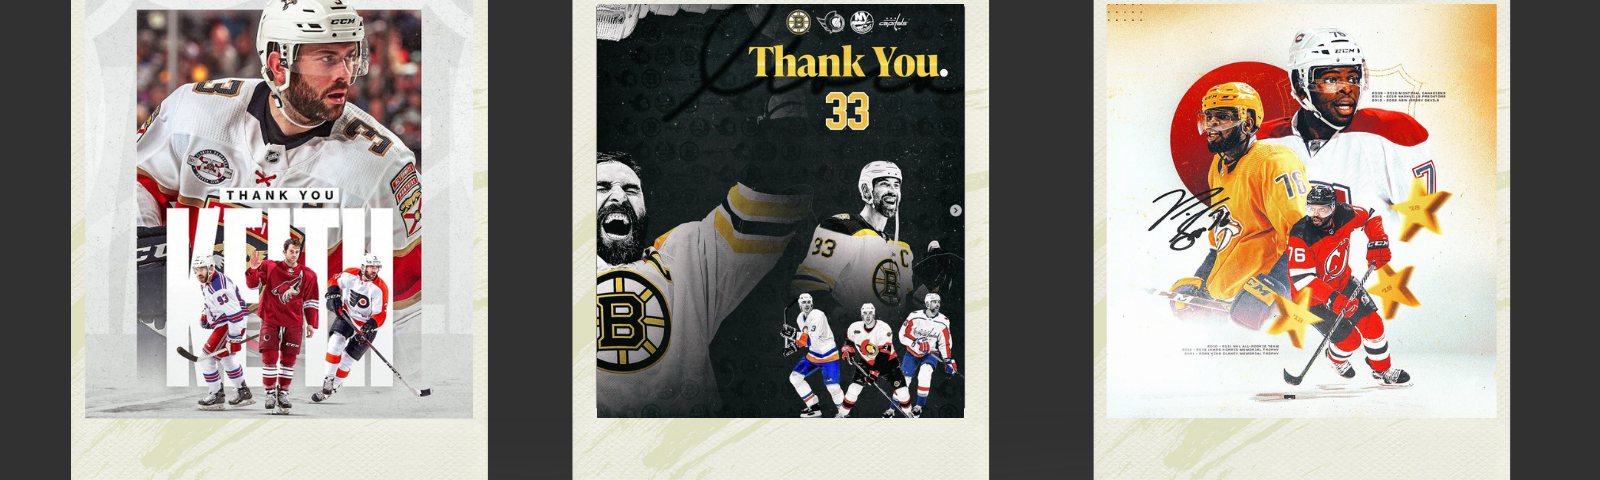 Graphic showing posts about Keith Yandle, Zdeno Chara and PK Subban retiring.